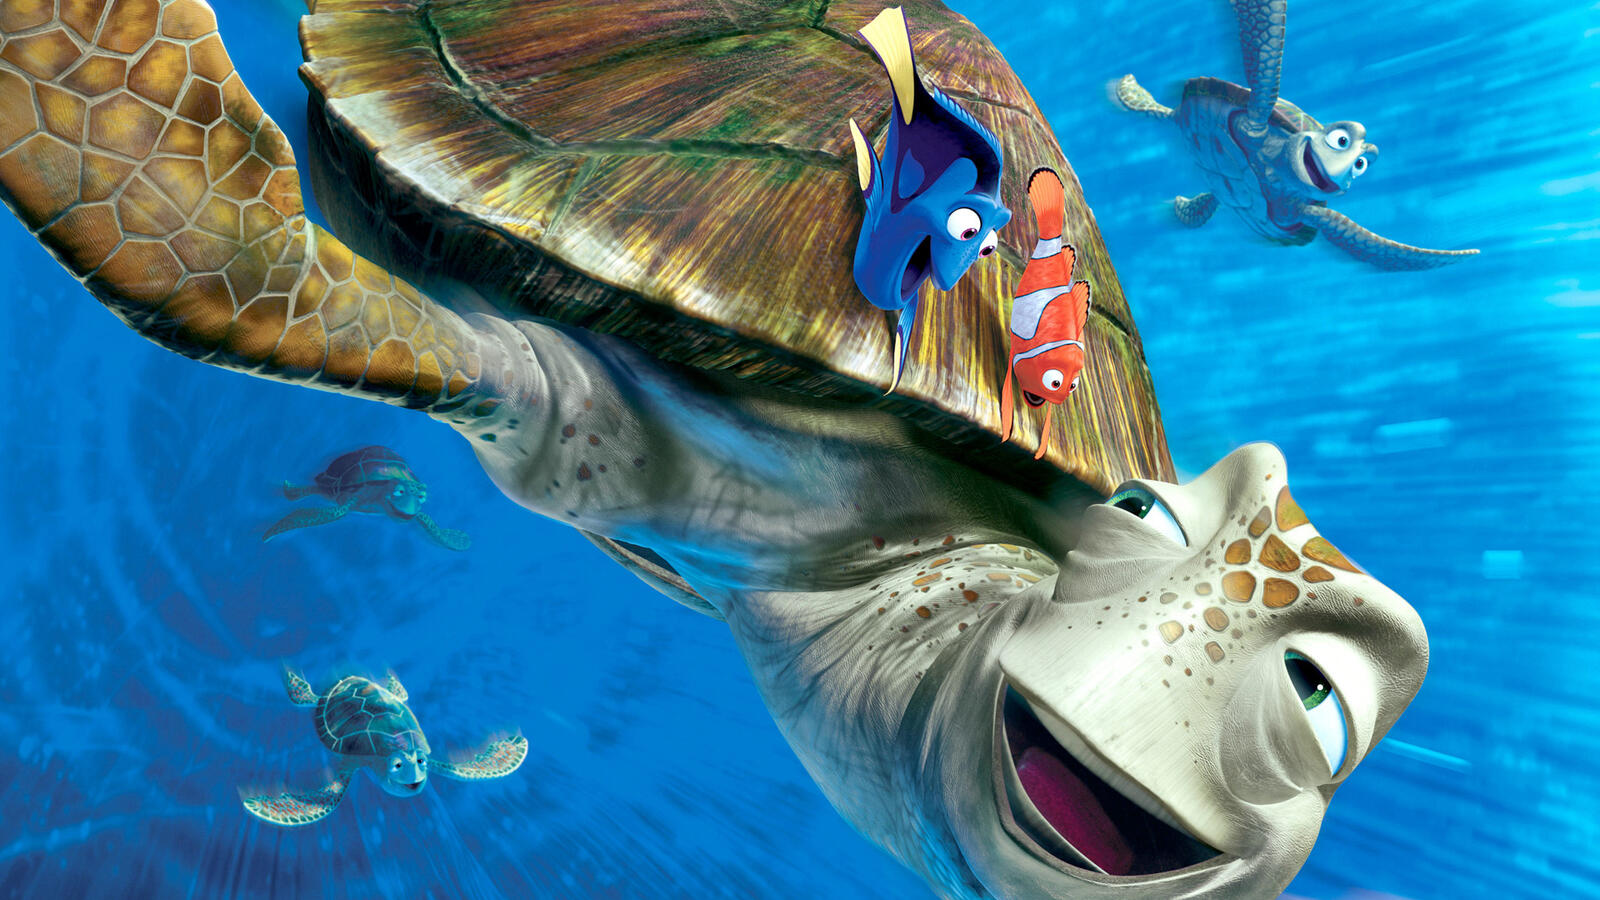 Wallpapers finding Nemo cinema animated movies on the desktop